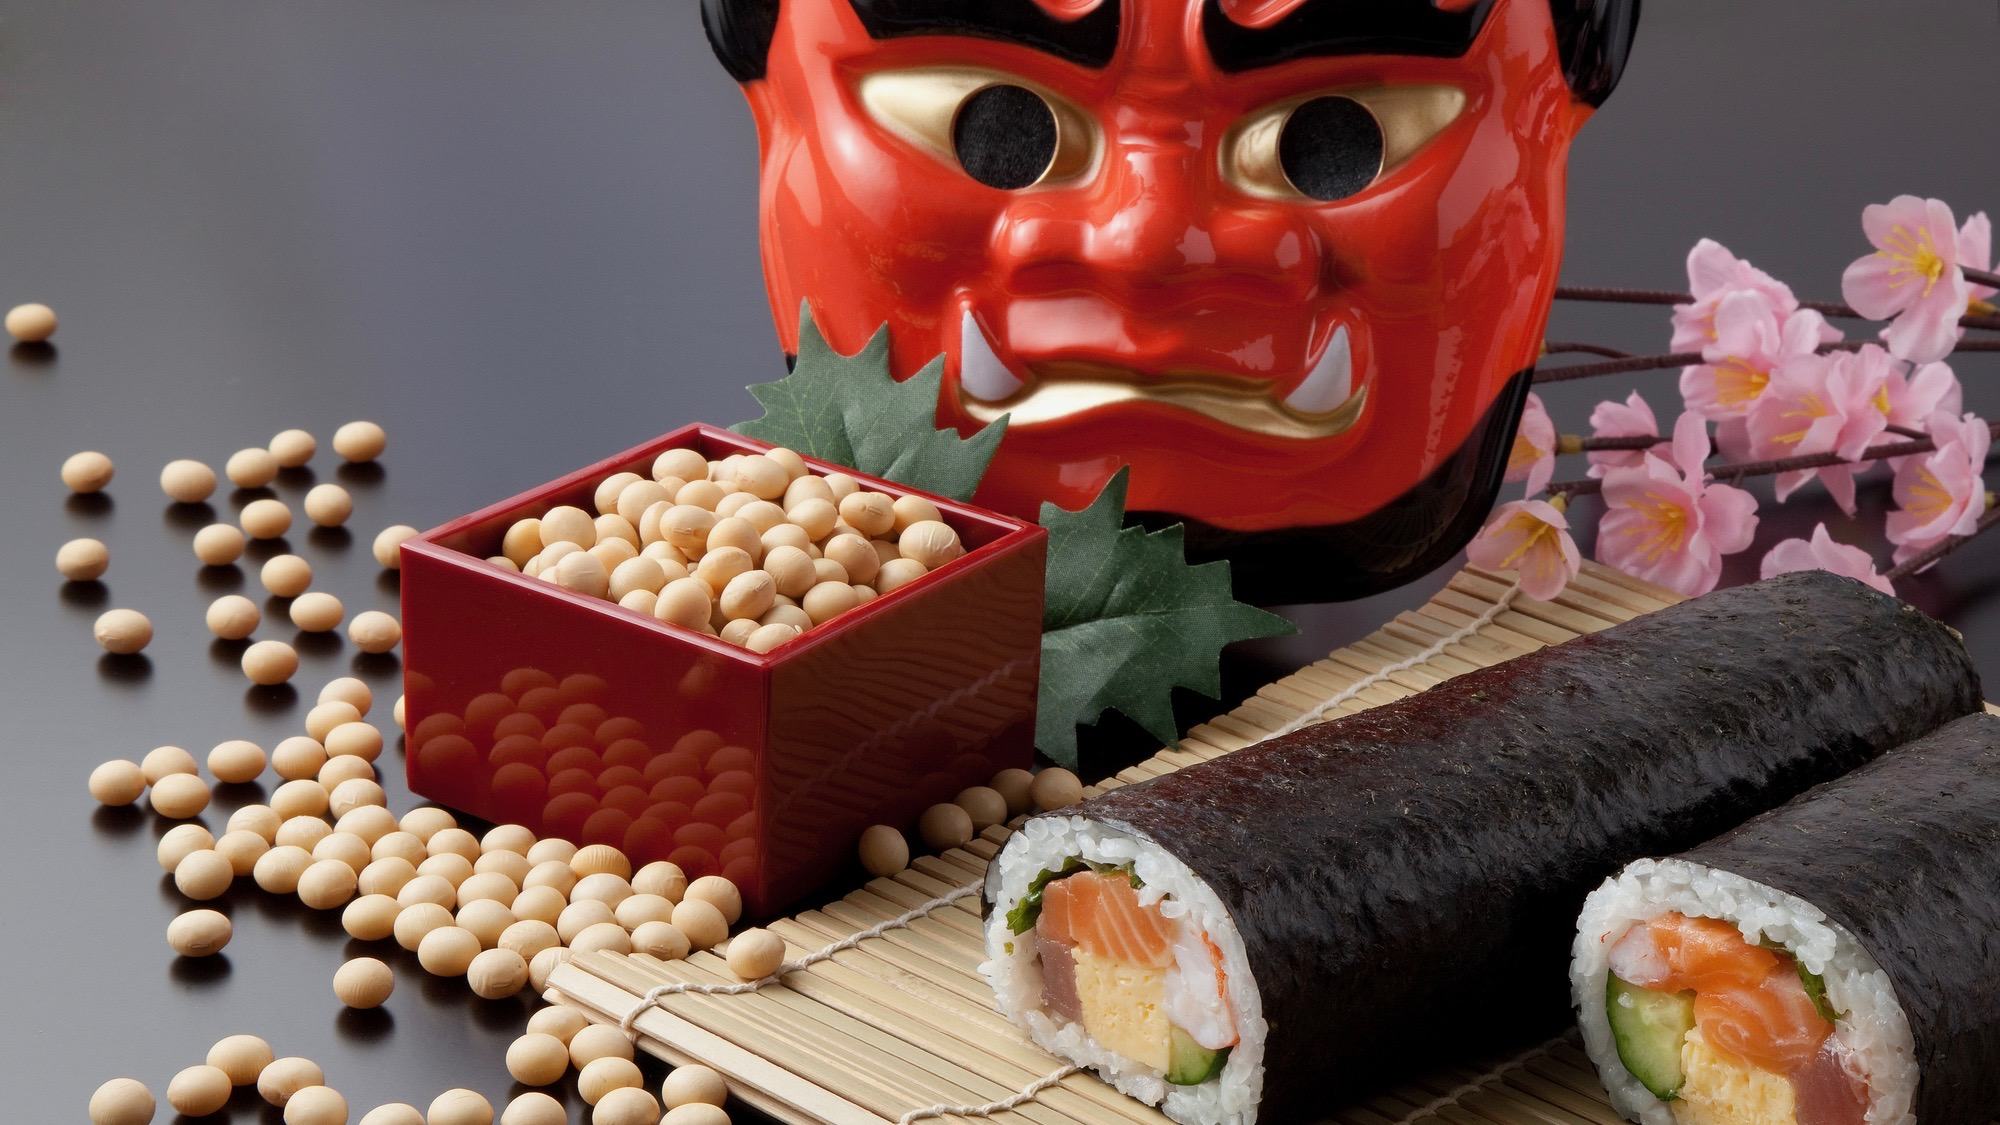 February is the old beginning of spring based on the Chinese lunar calendar and Setsubun is Japan's celebration of this transition with oni devils and protective beans